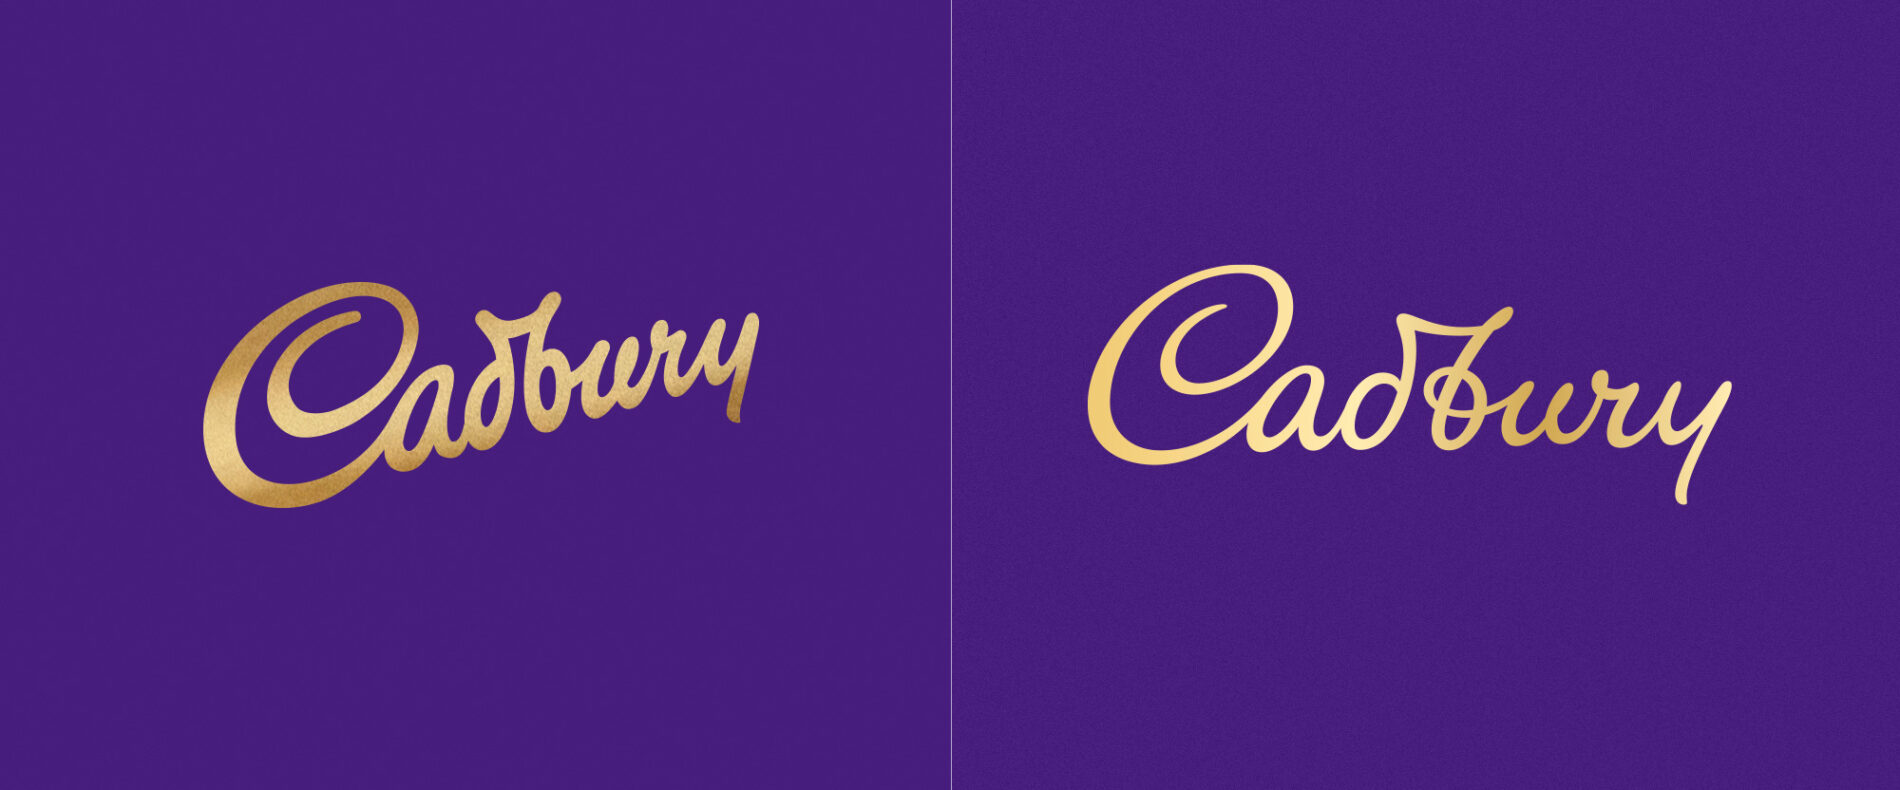 Cadbury logo - Before and After